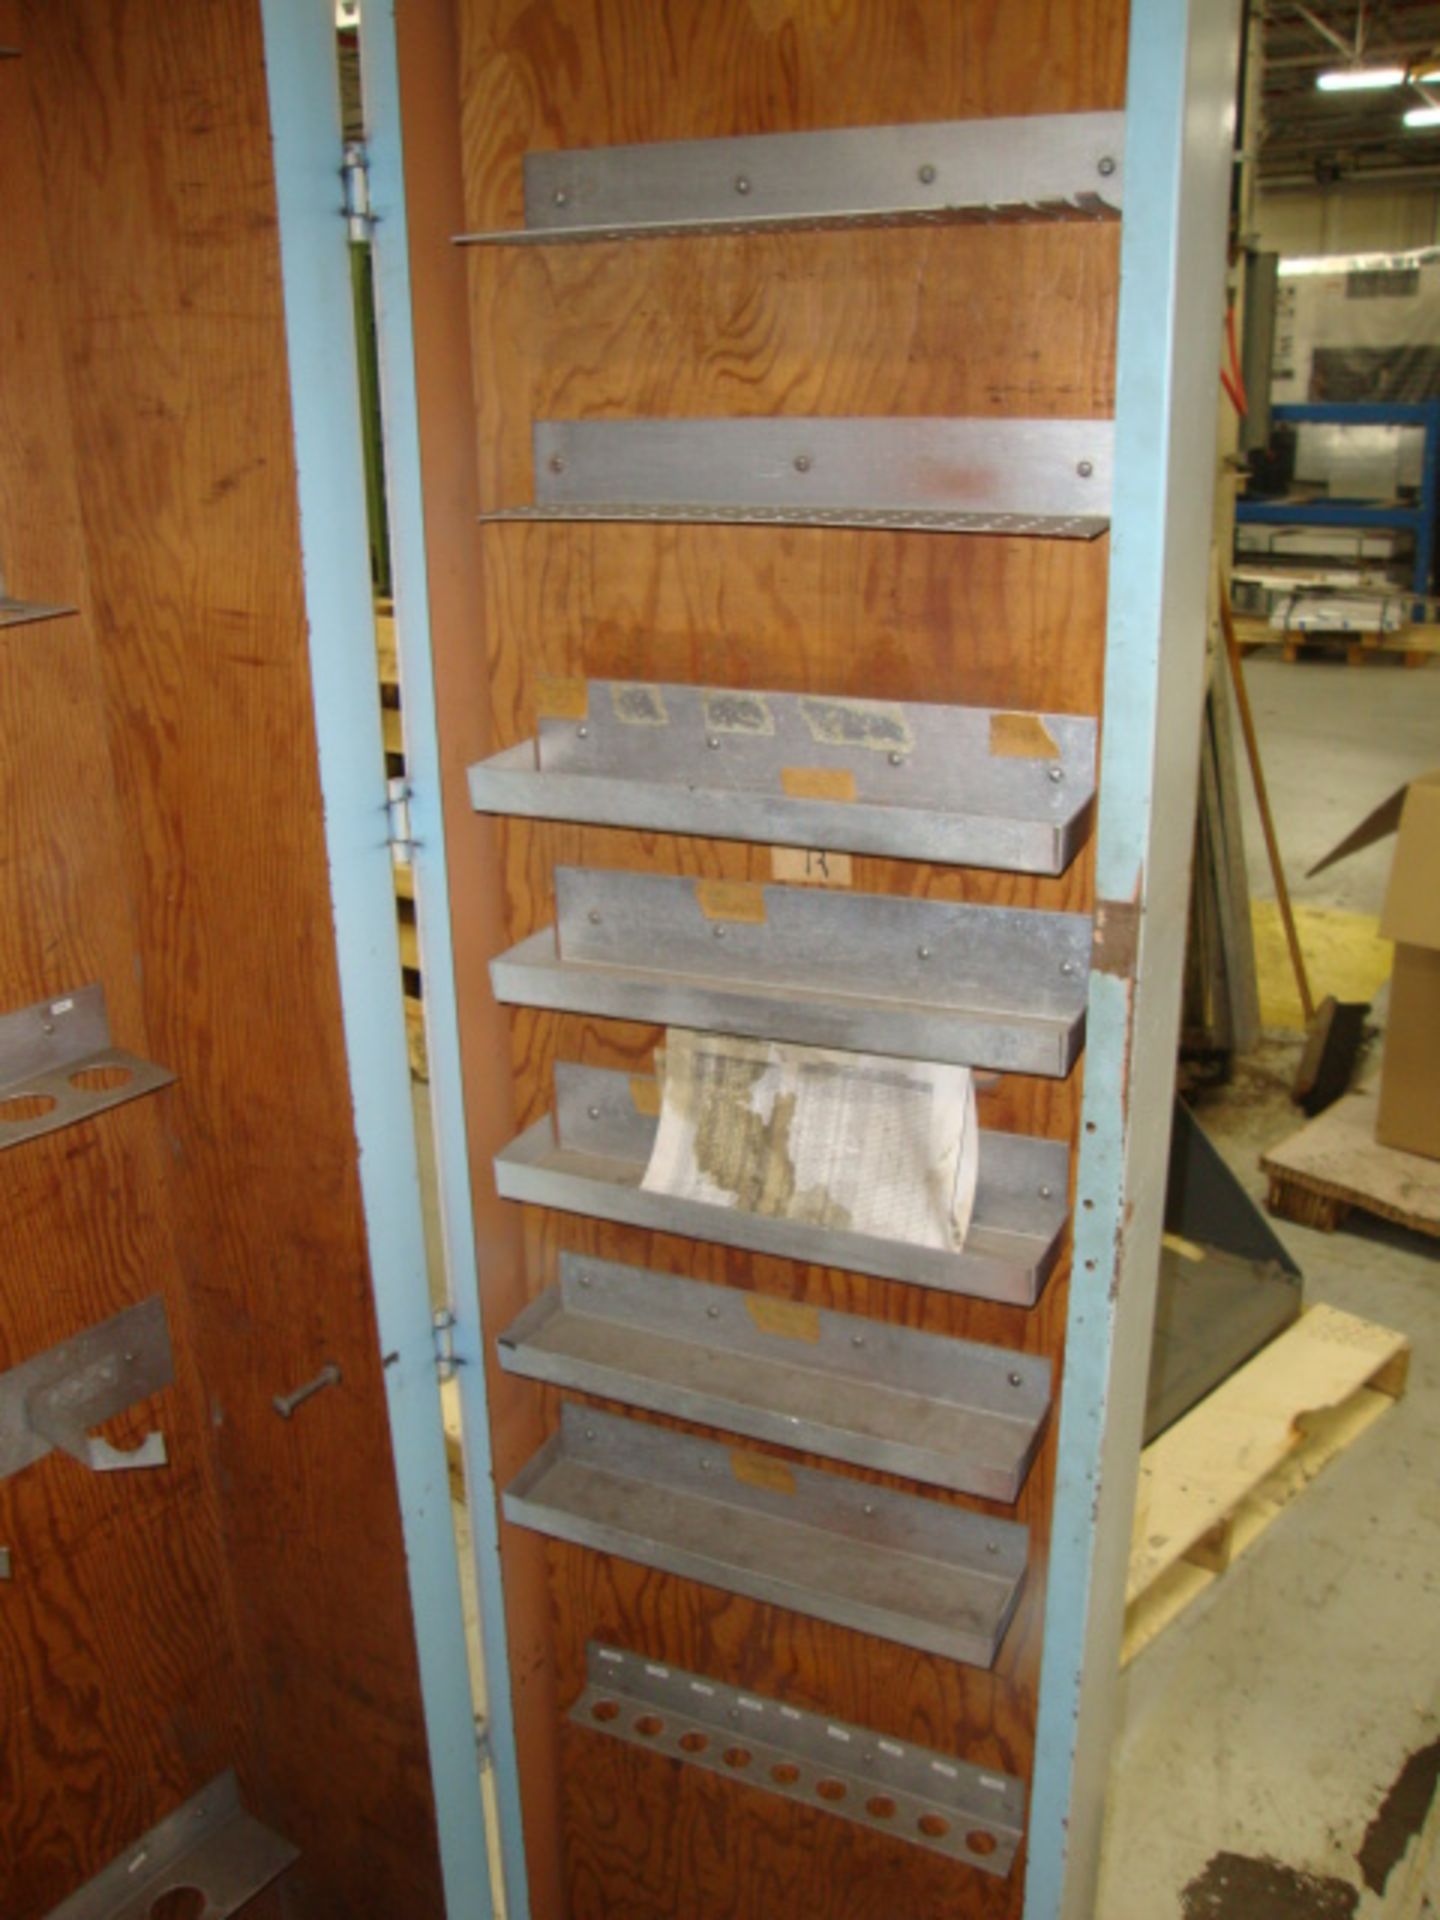 HD Storage Cabinet, approx. 36" x 16" x 78" tall - Image 4 of 4